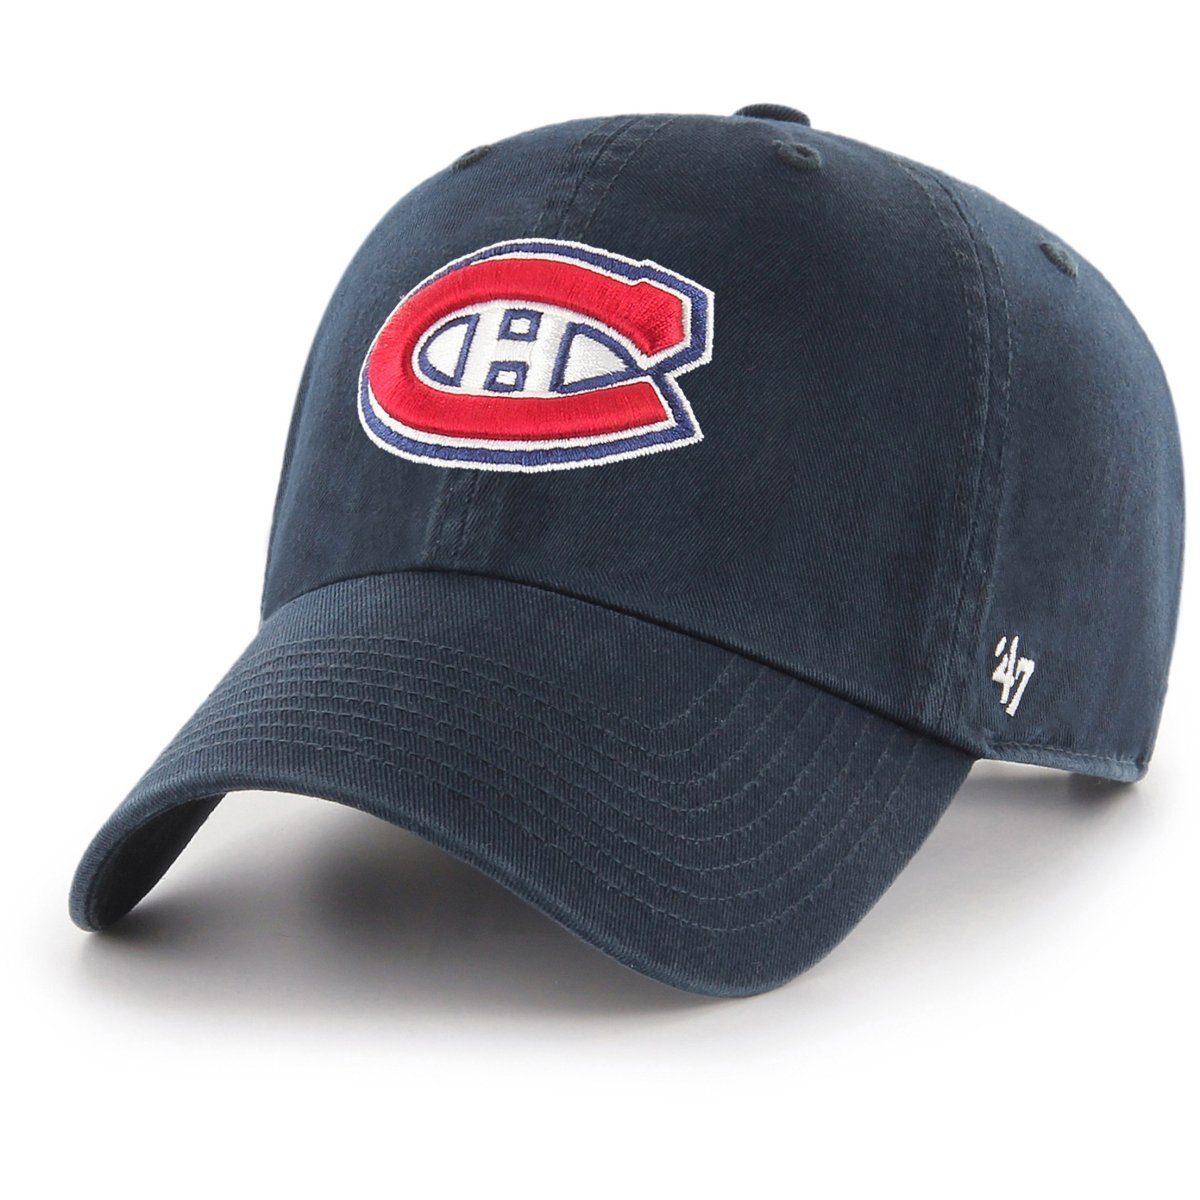 '47 Brand Baseball Cap CLEAN UP Montreal Canadiens